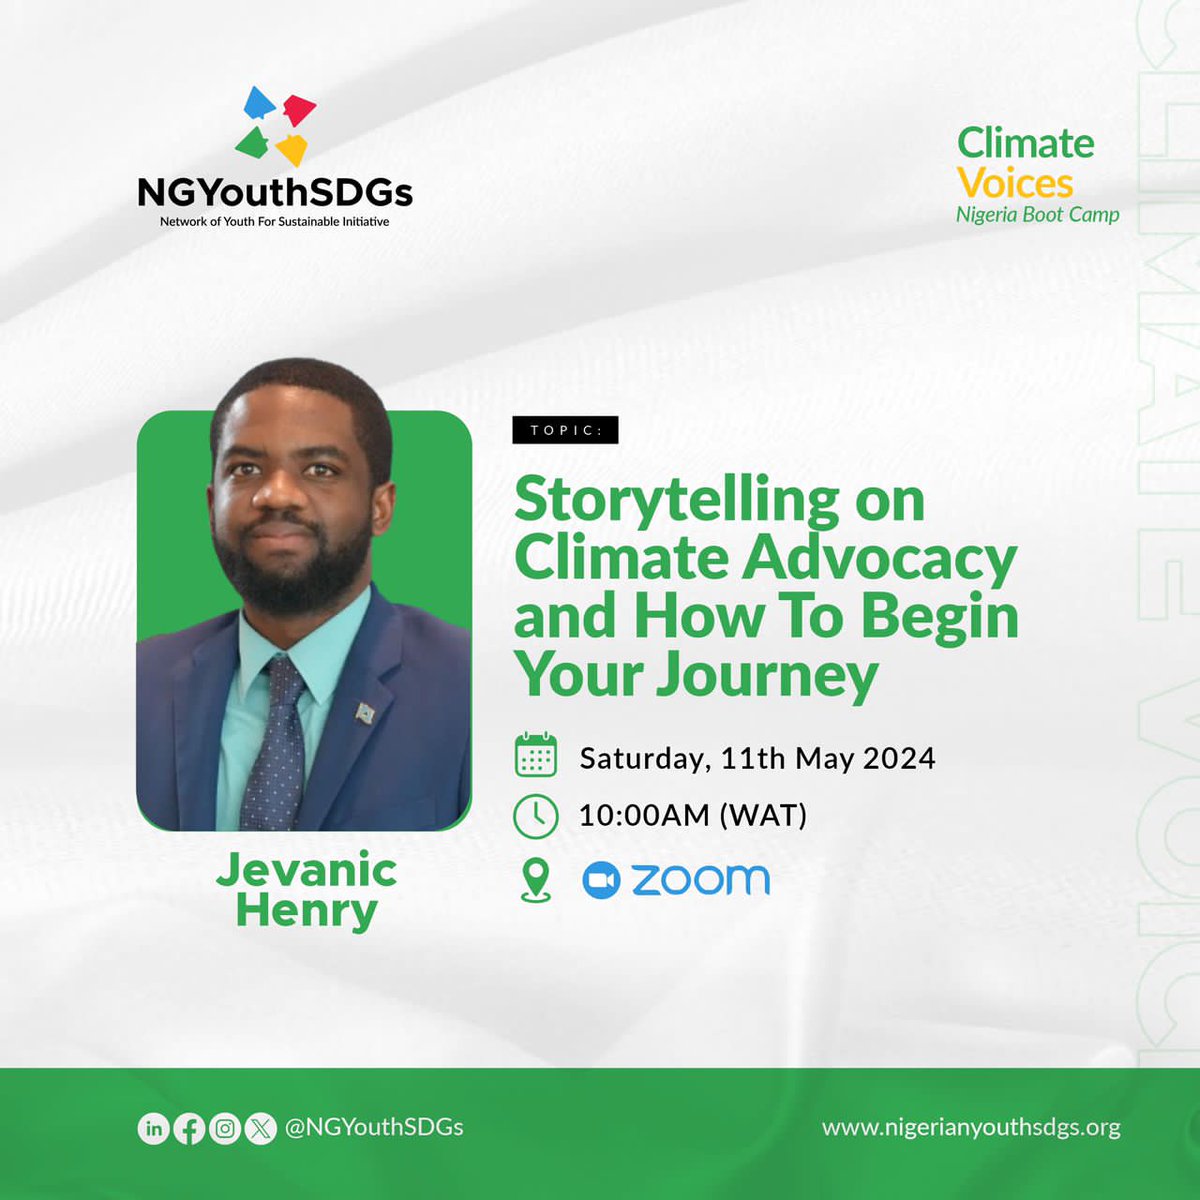 In the journey of #ClimateVoicesNG bootcamp, last Saturday was about fascinating stories about climate change and how it affected some communities and people also how they made great impact from some unfortunate events. We all have a story that can make us set a great milestone.